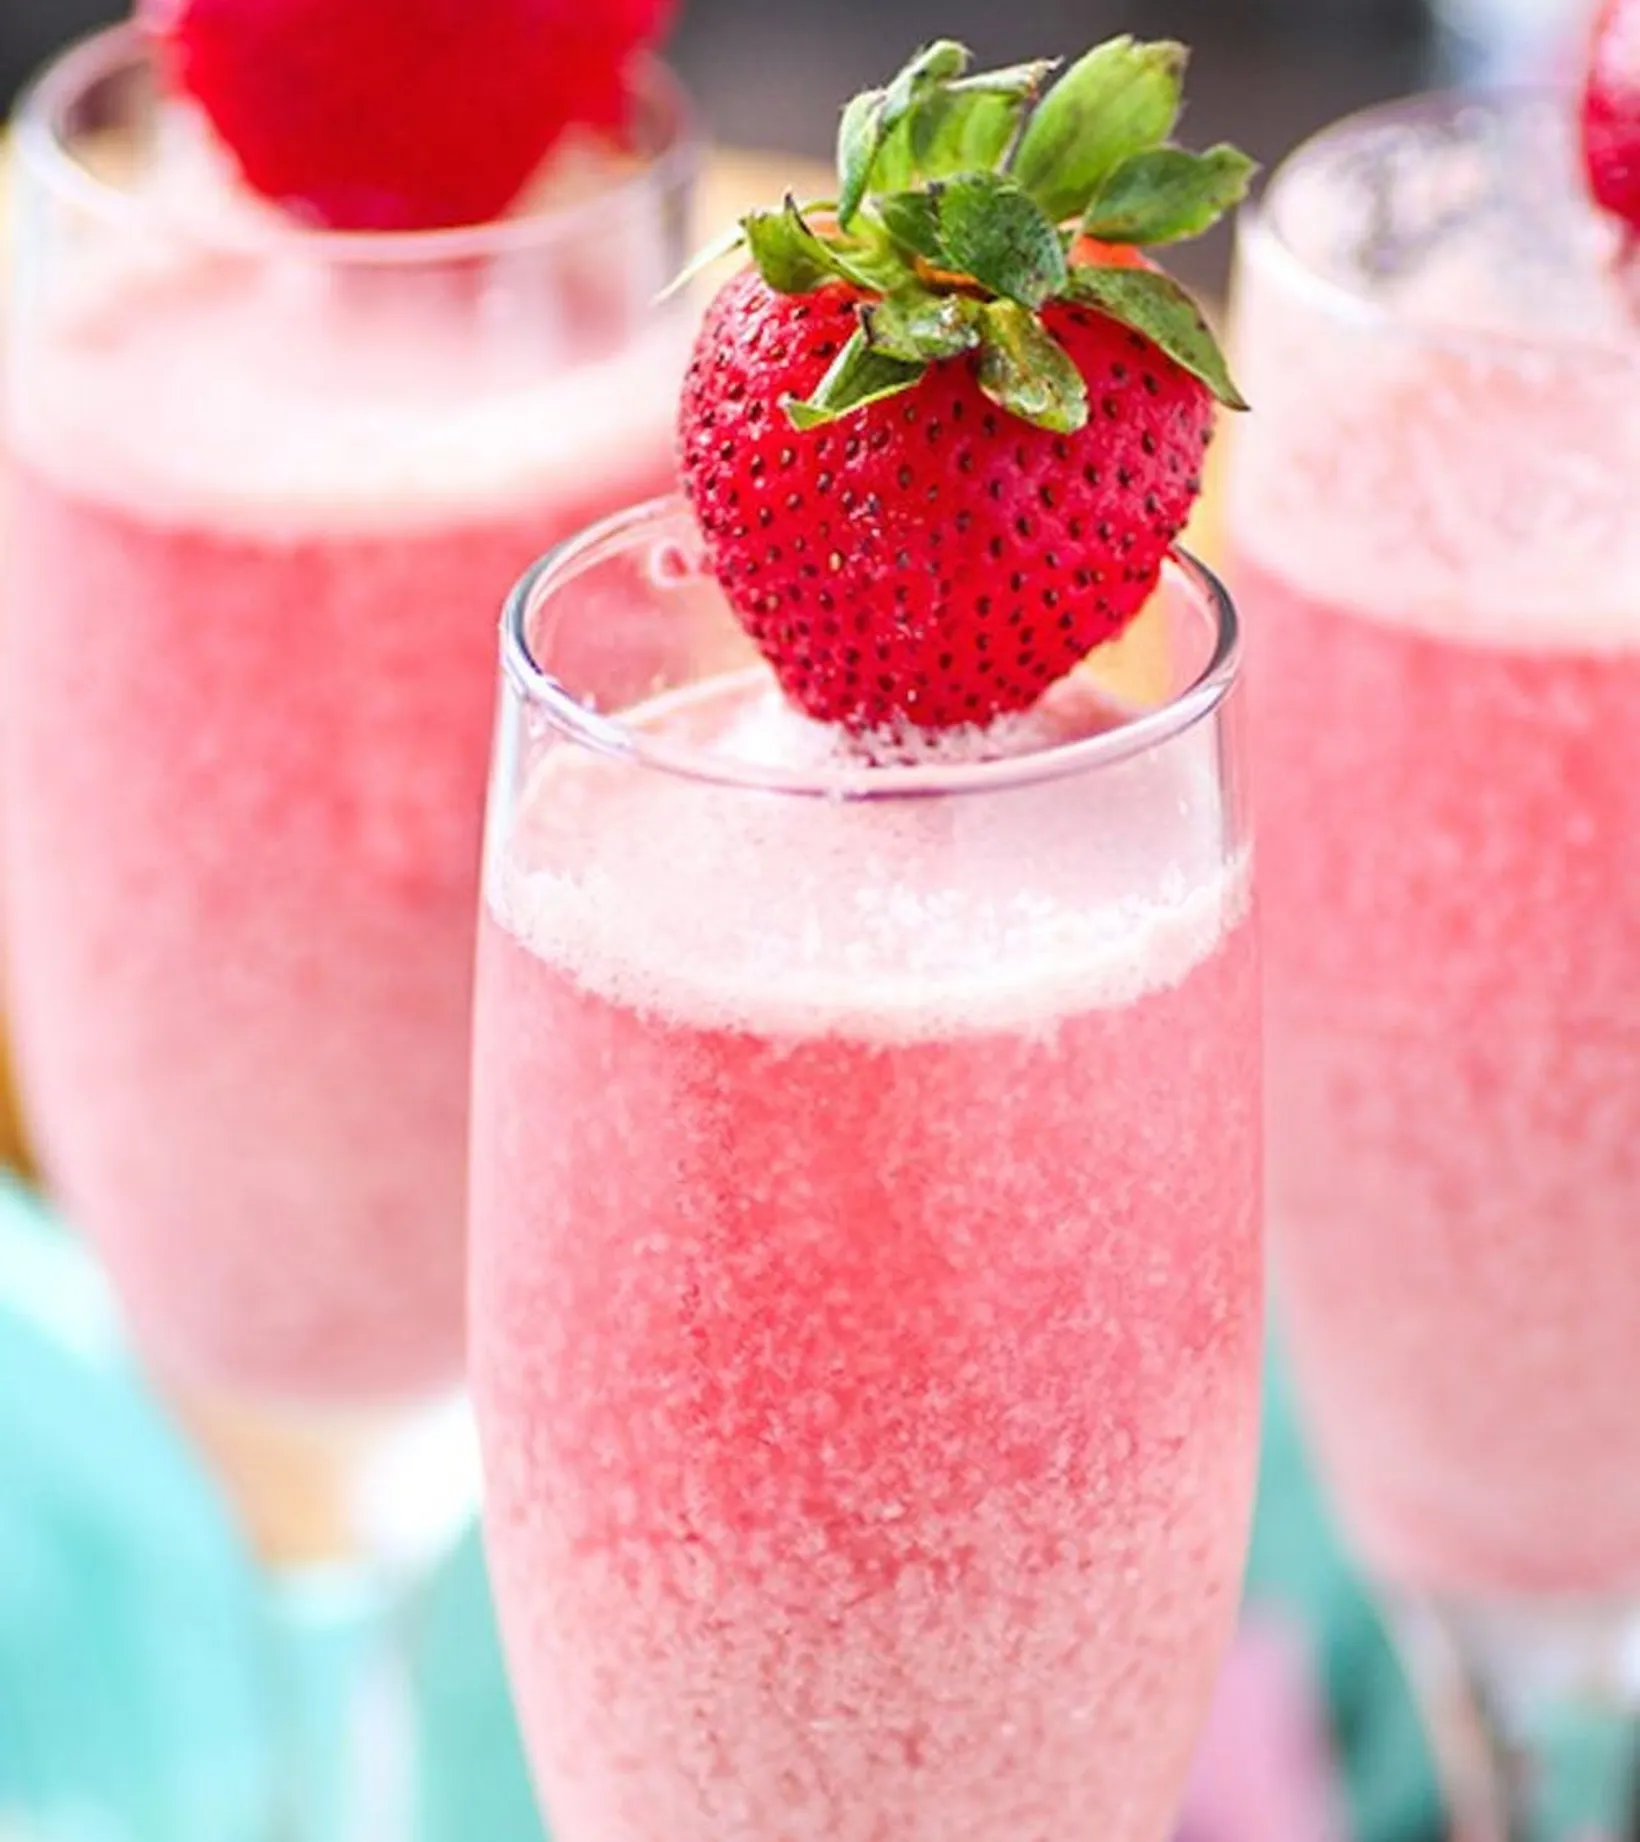 Strawberry Cream Mimosa - Looking for some tasty and colorful cocktail inspiration? Look no further than our round-up of the 10 most delicious pink cocktails! From refreshing fruity blends to classic favorites, there's something for every taste in this list. So why not mix things up and try one of these pretty pink drinks at your next gathering?